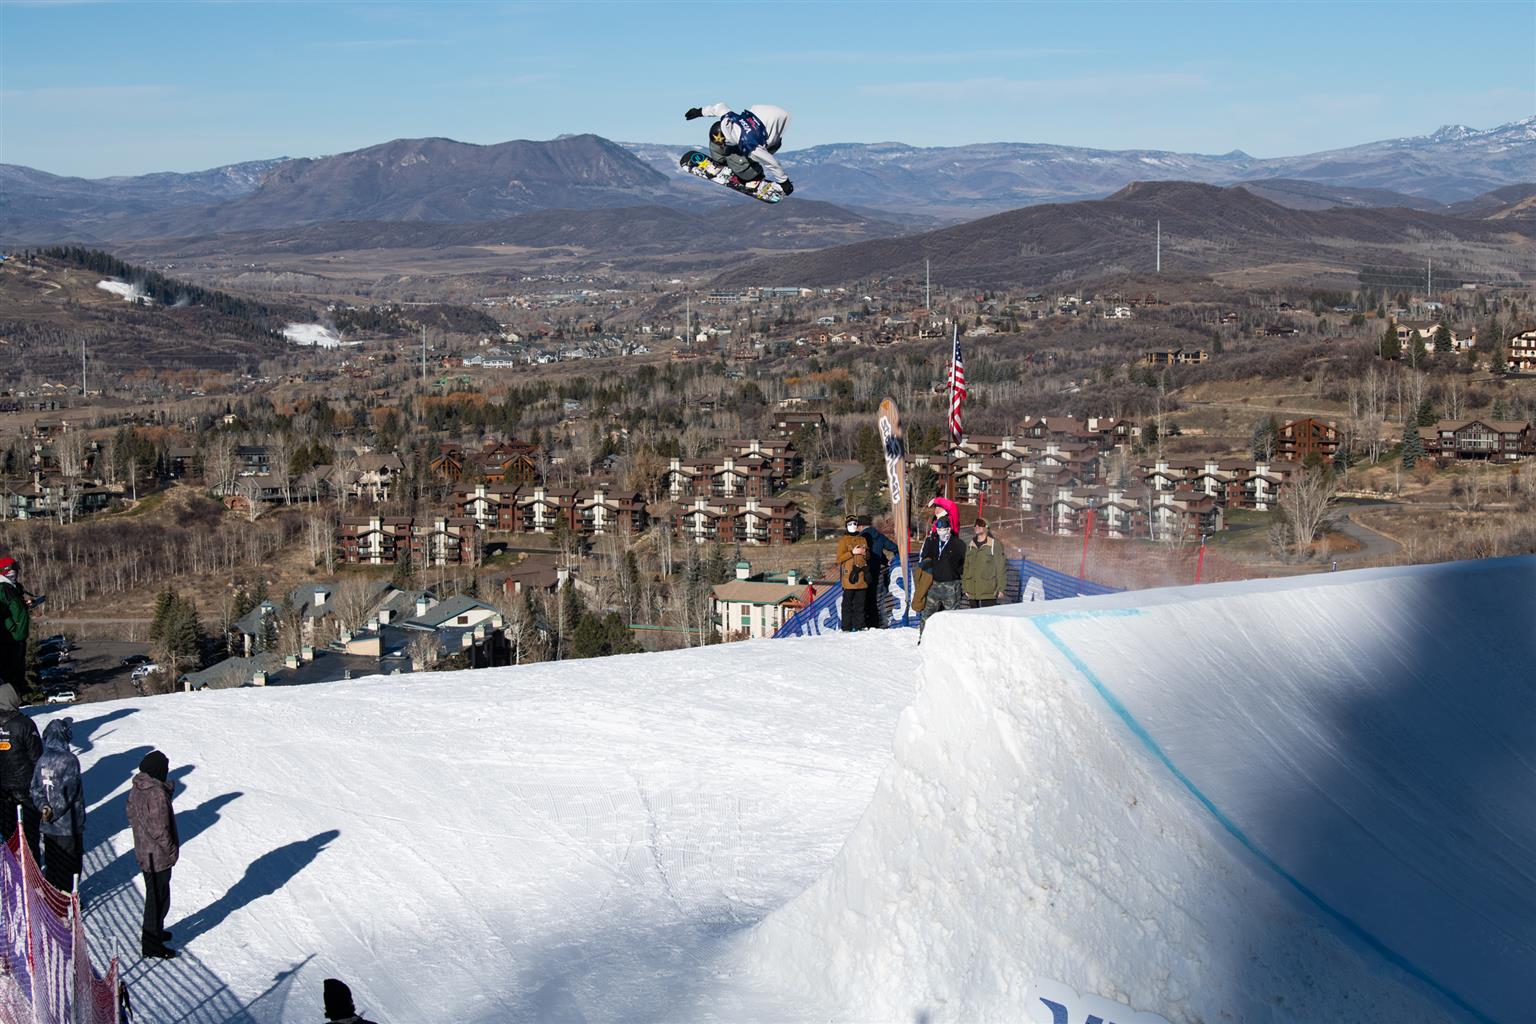 World Cup slots decided at freestyle event in Steamboat